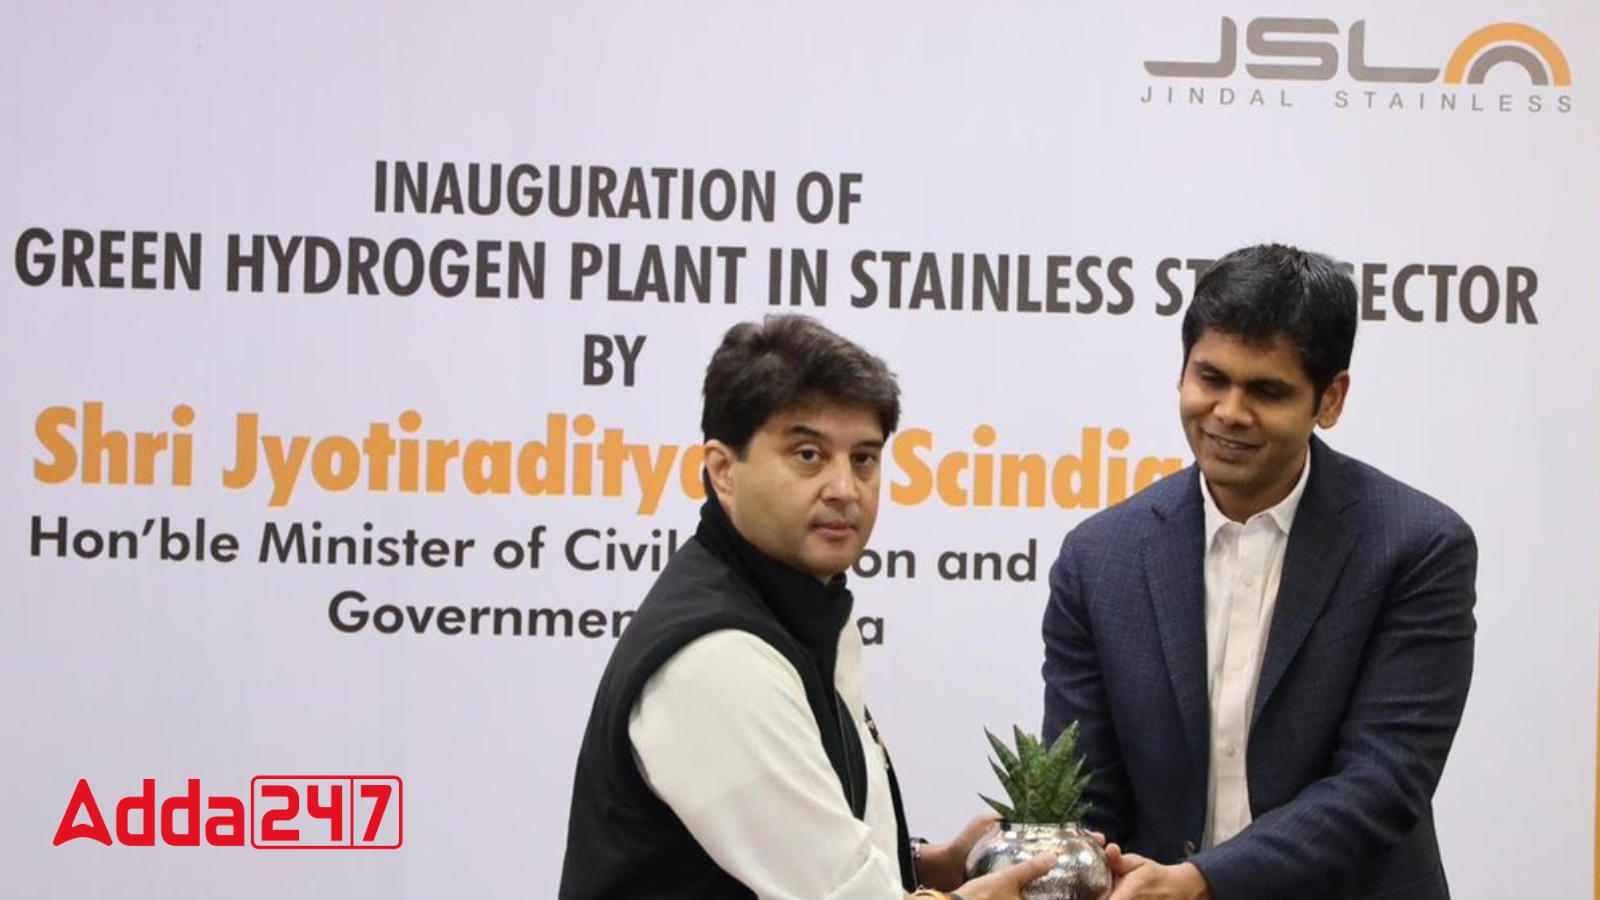 Steel Minister Unveils India’s First Green Hydrogen Plant In Stainless Steel Sector